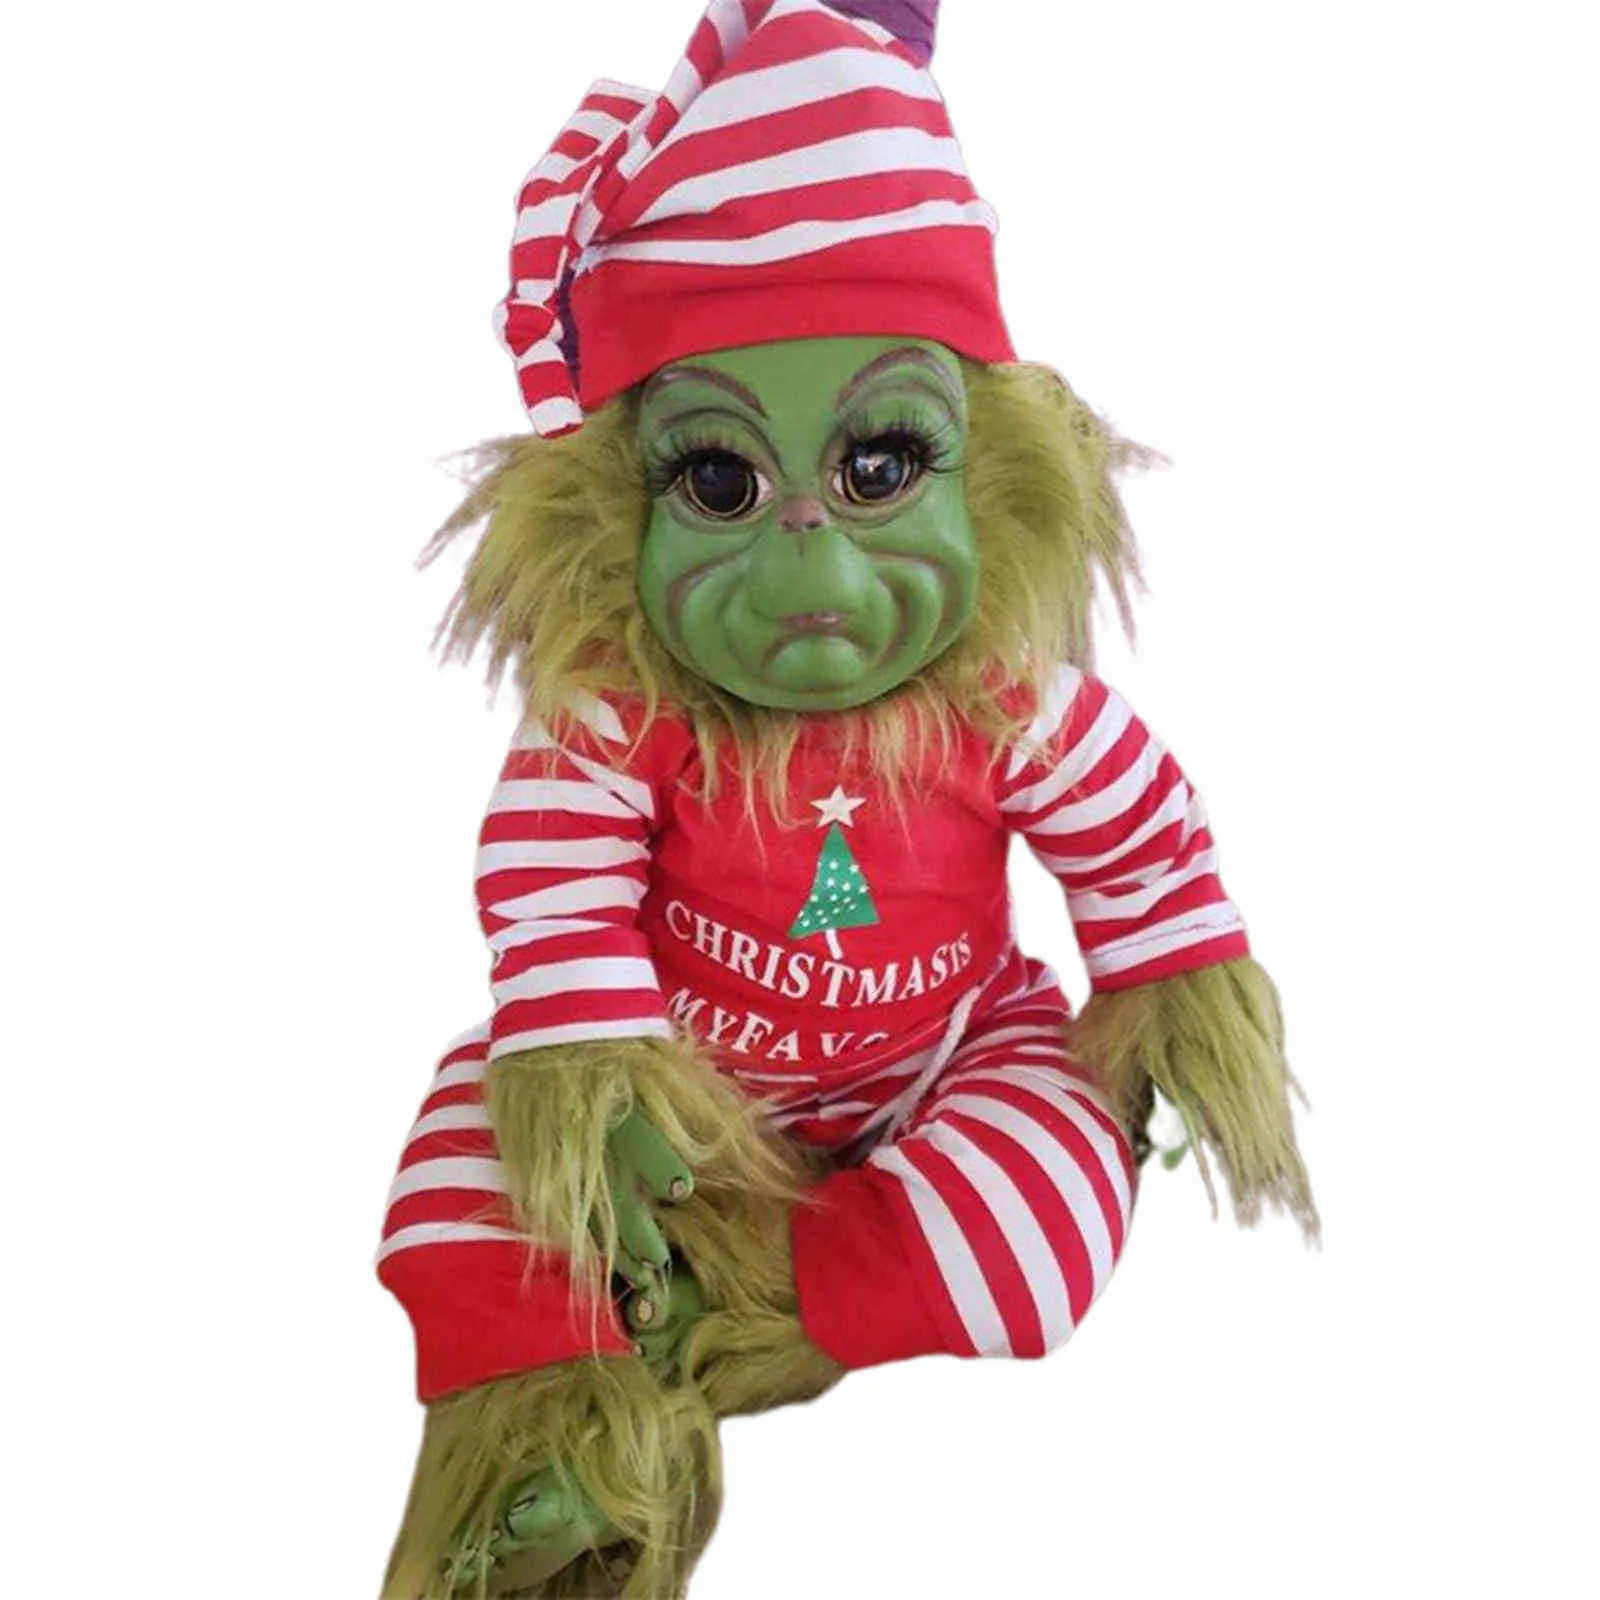 Grinch Doll Cute Christmas Stuffed Plush Toy Xmas Gifts for Kids Home Decoration in Stock 2111091837724